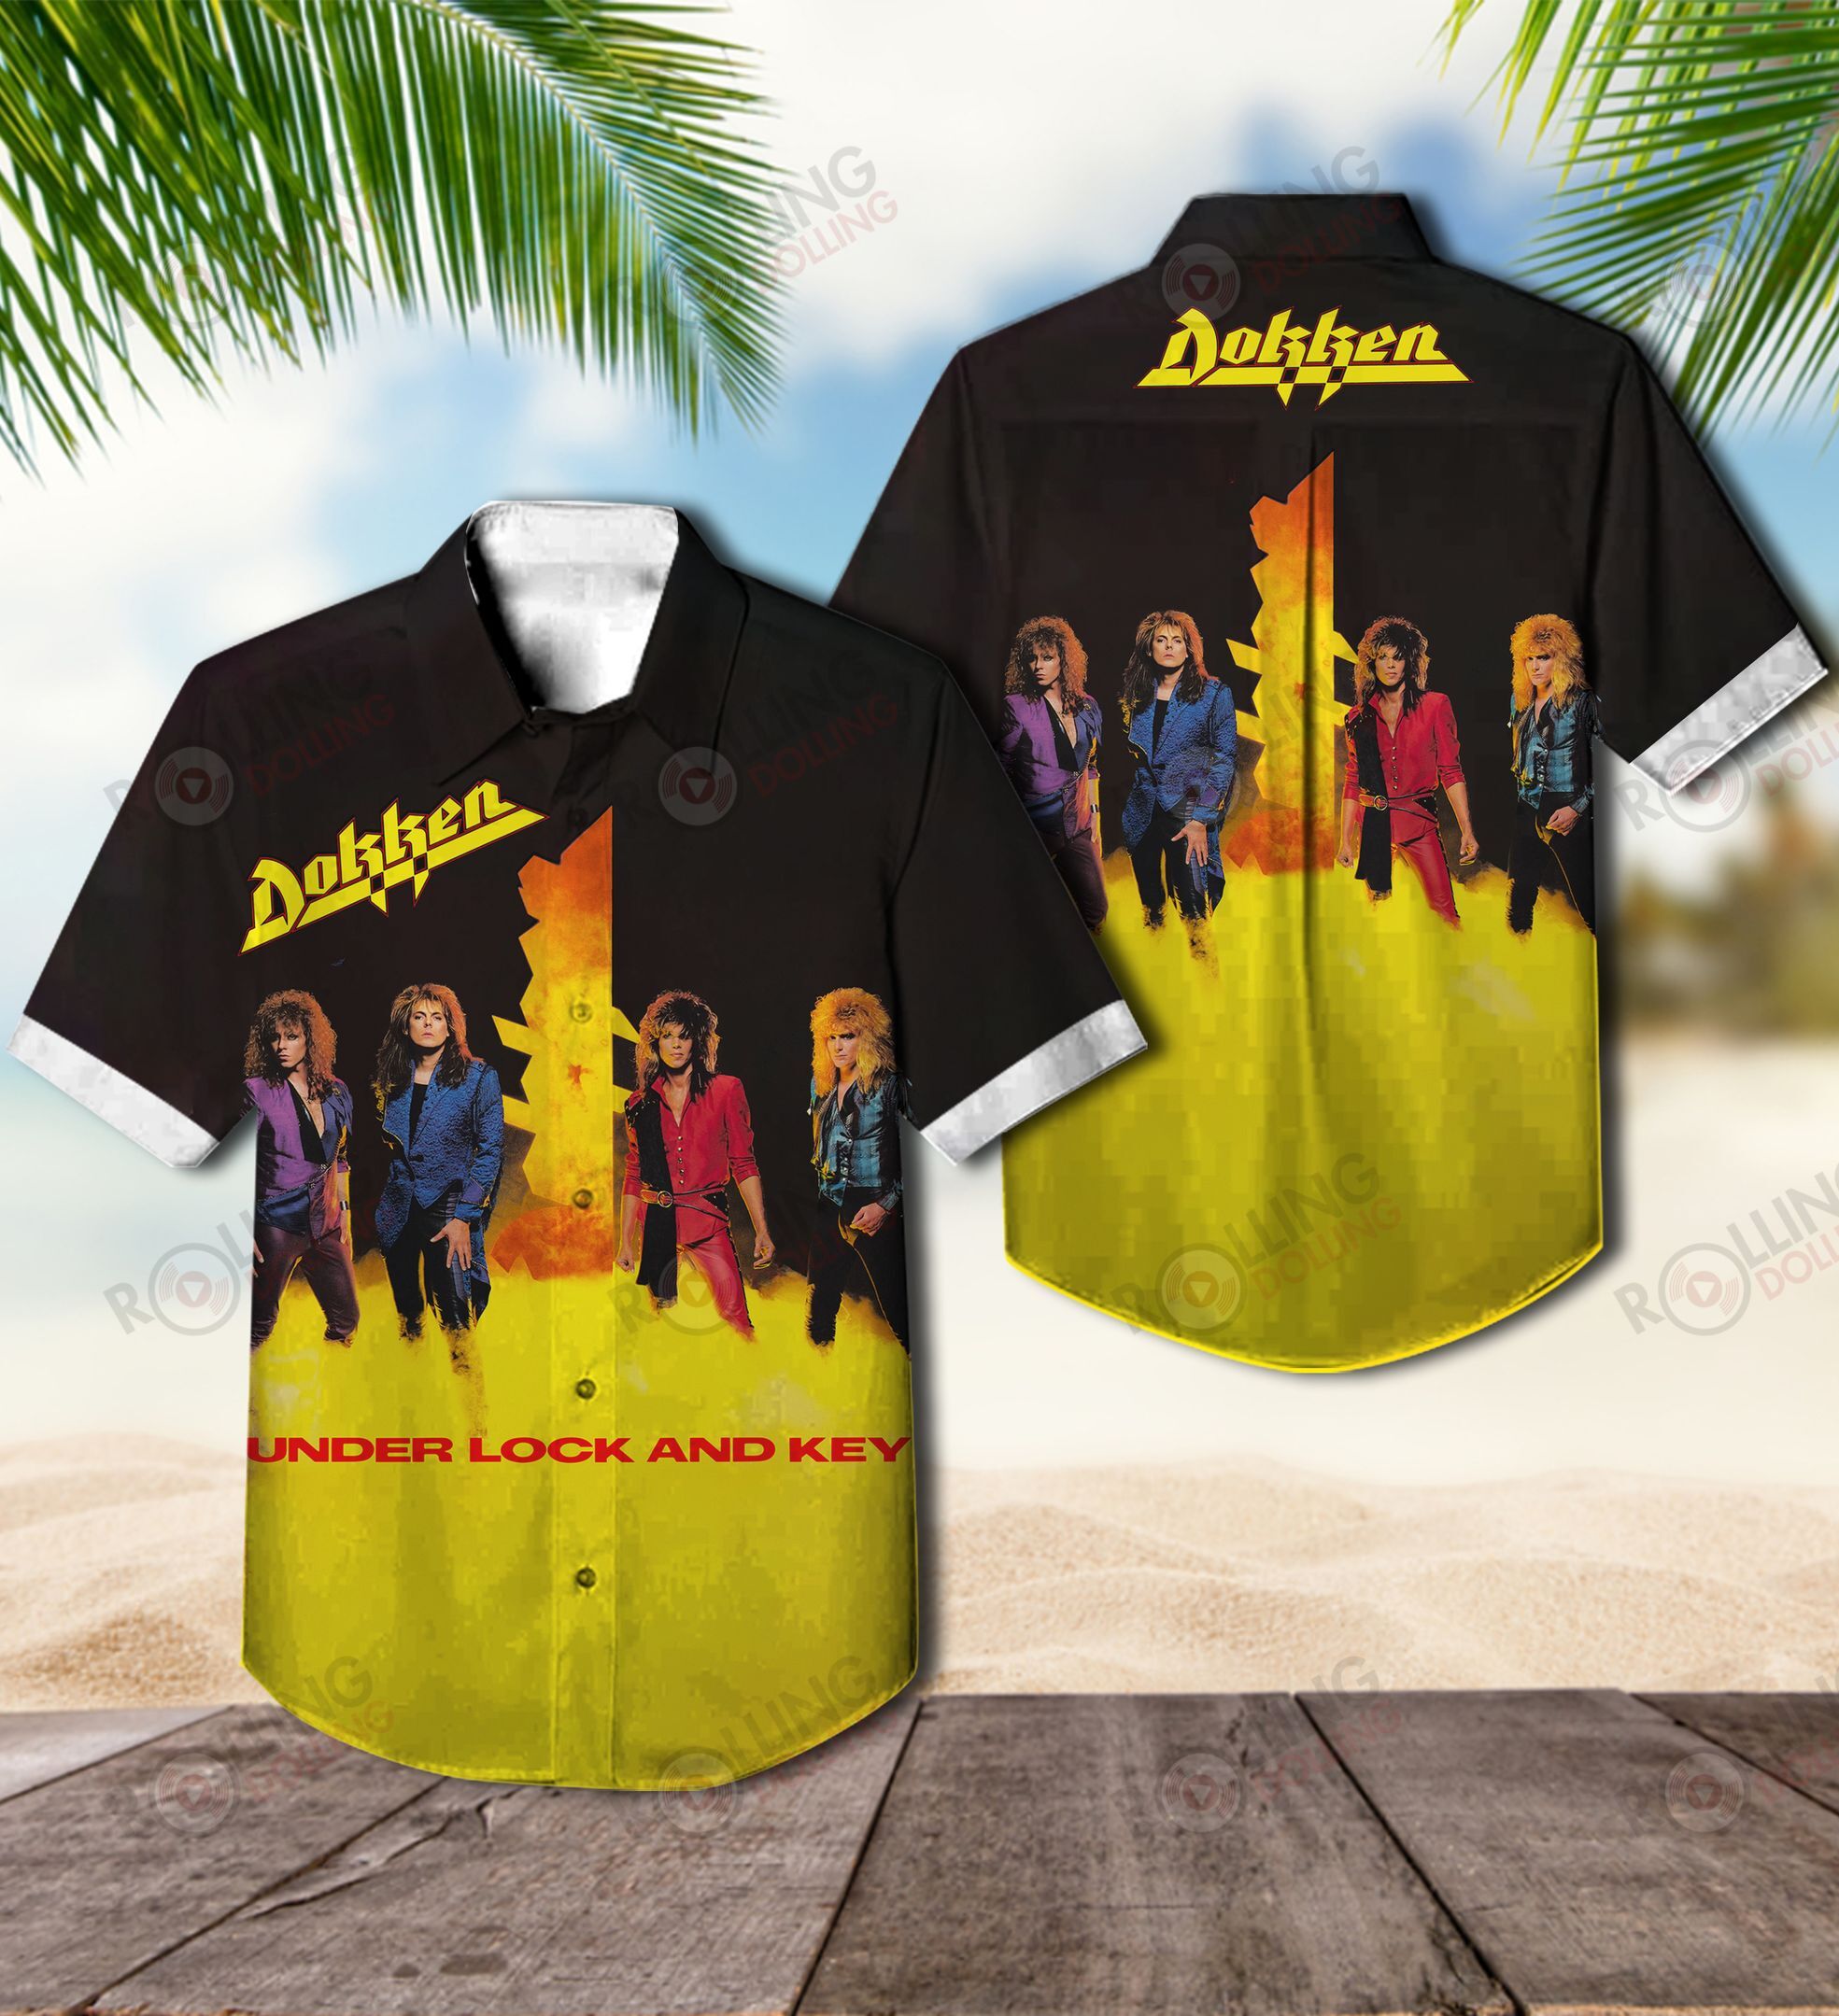 Now you can show off your love of all things band with this Hawaiian Shirt 31